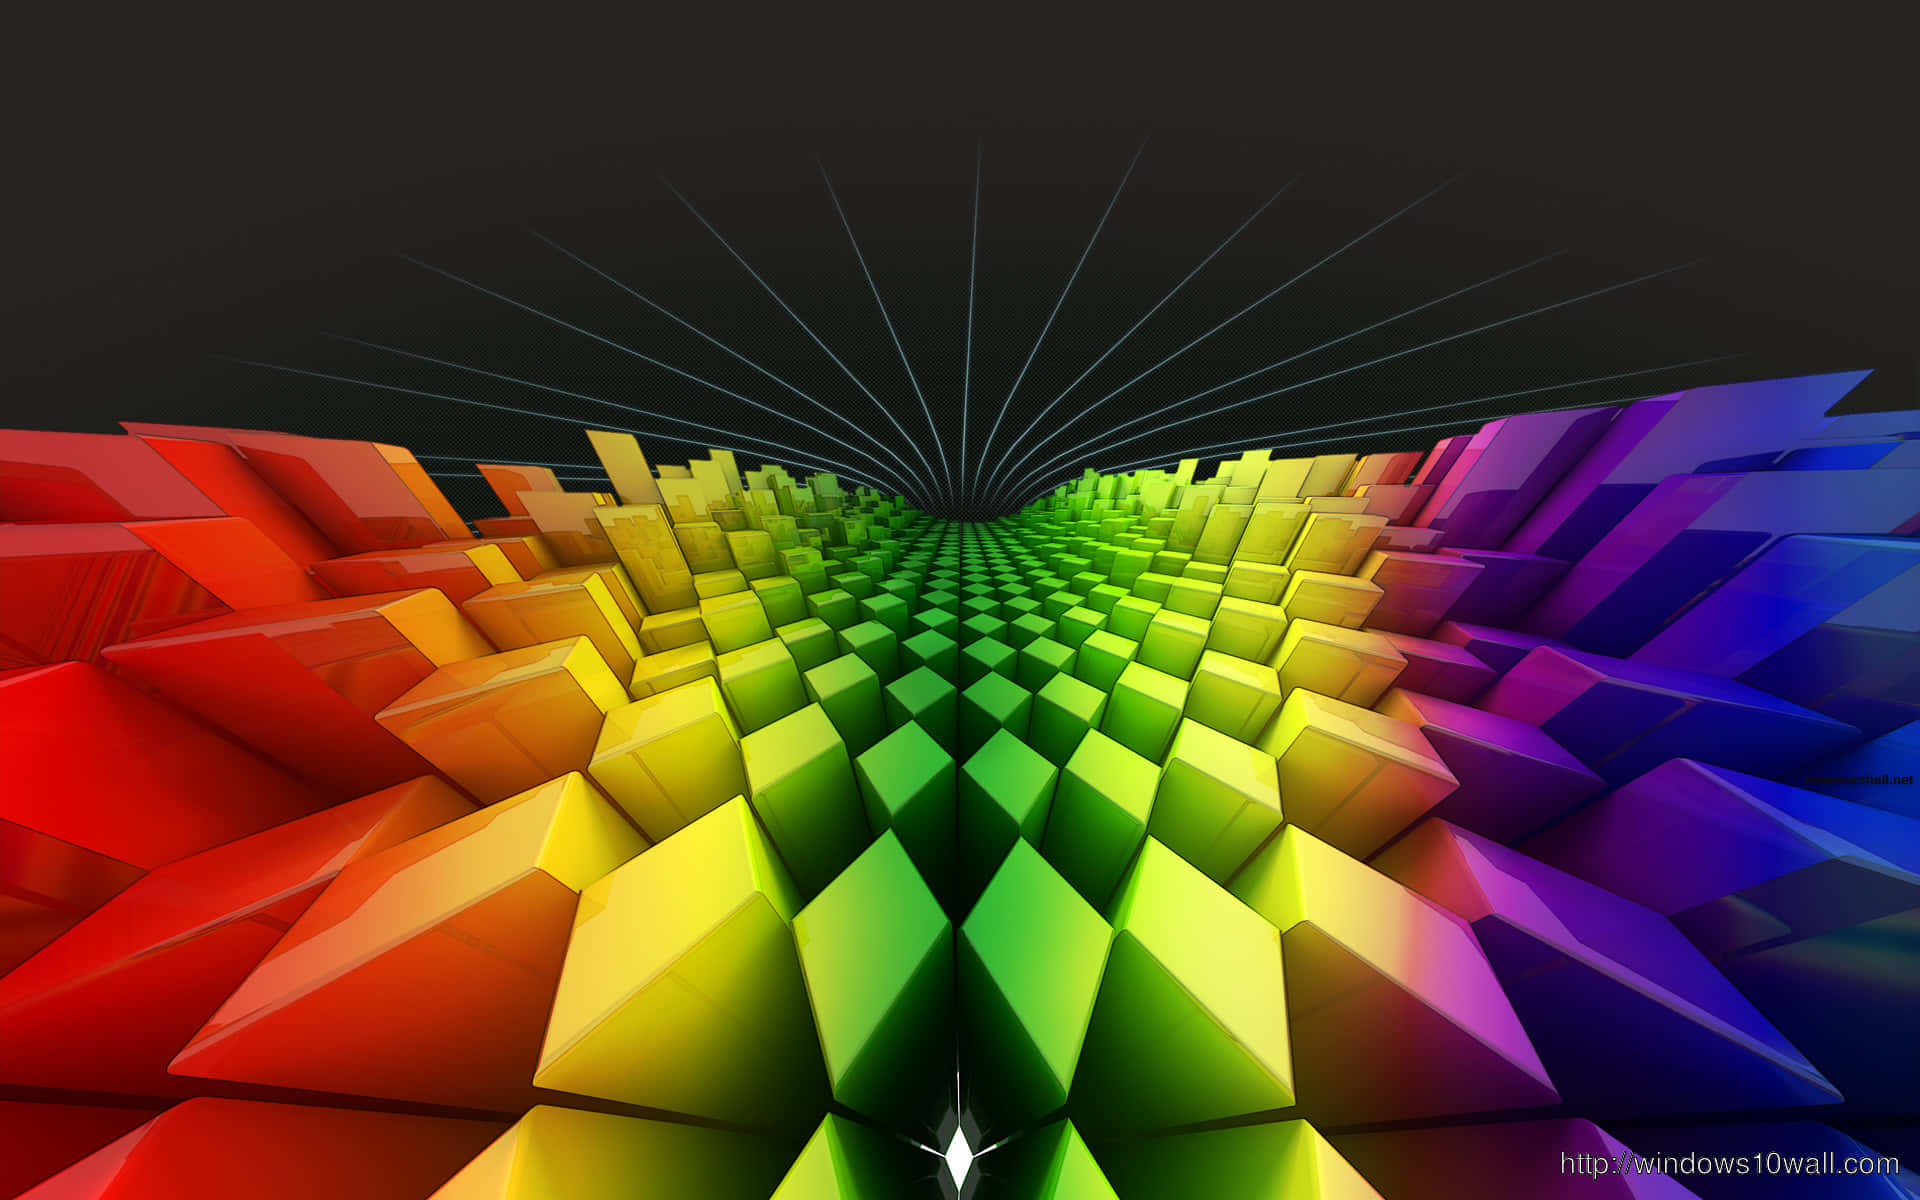 A Colorful Abstract Image Of A Rainbow Colored Cube Wallpaper